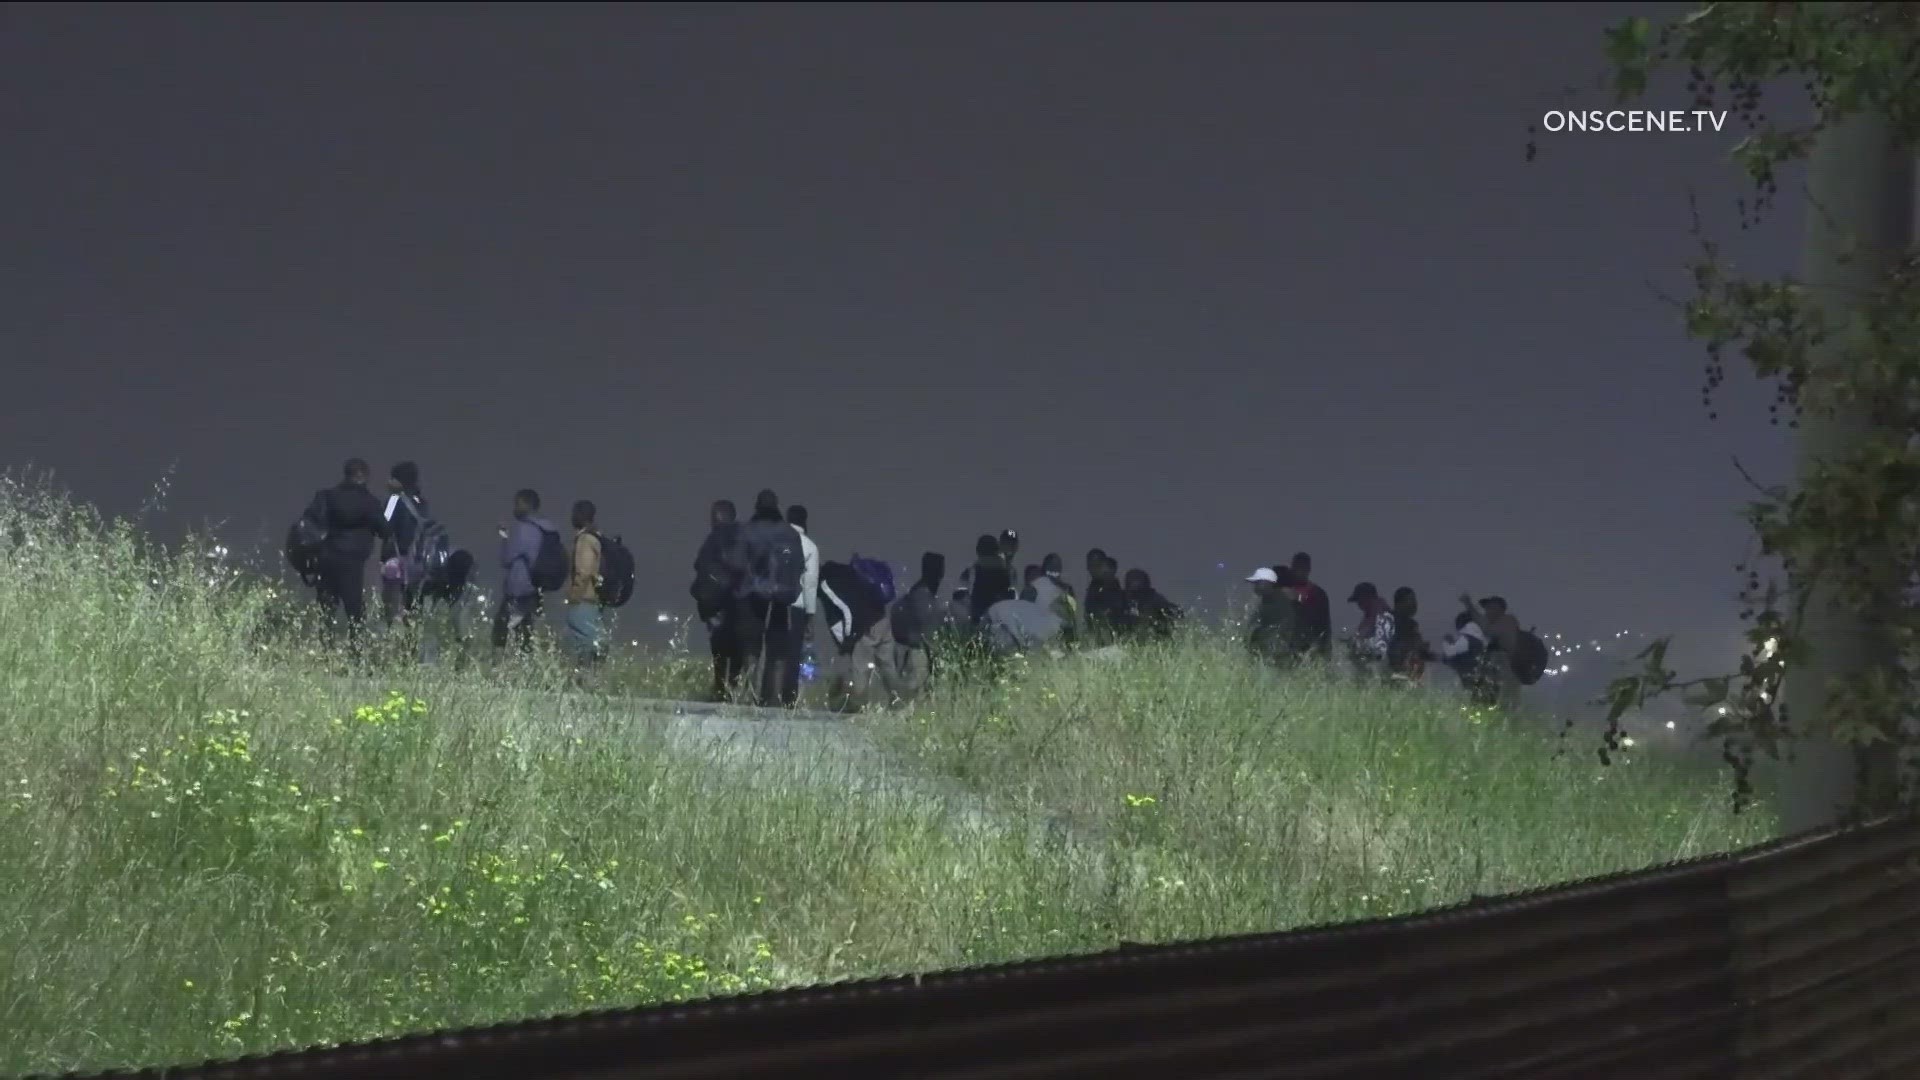 Sunday, April 30 marked the third day a large group of migrants tried to cross into the United States.